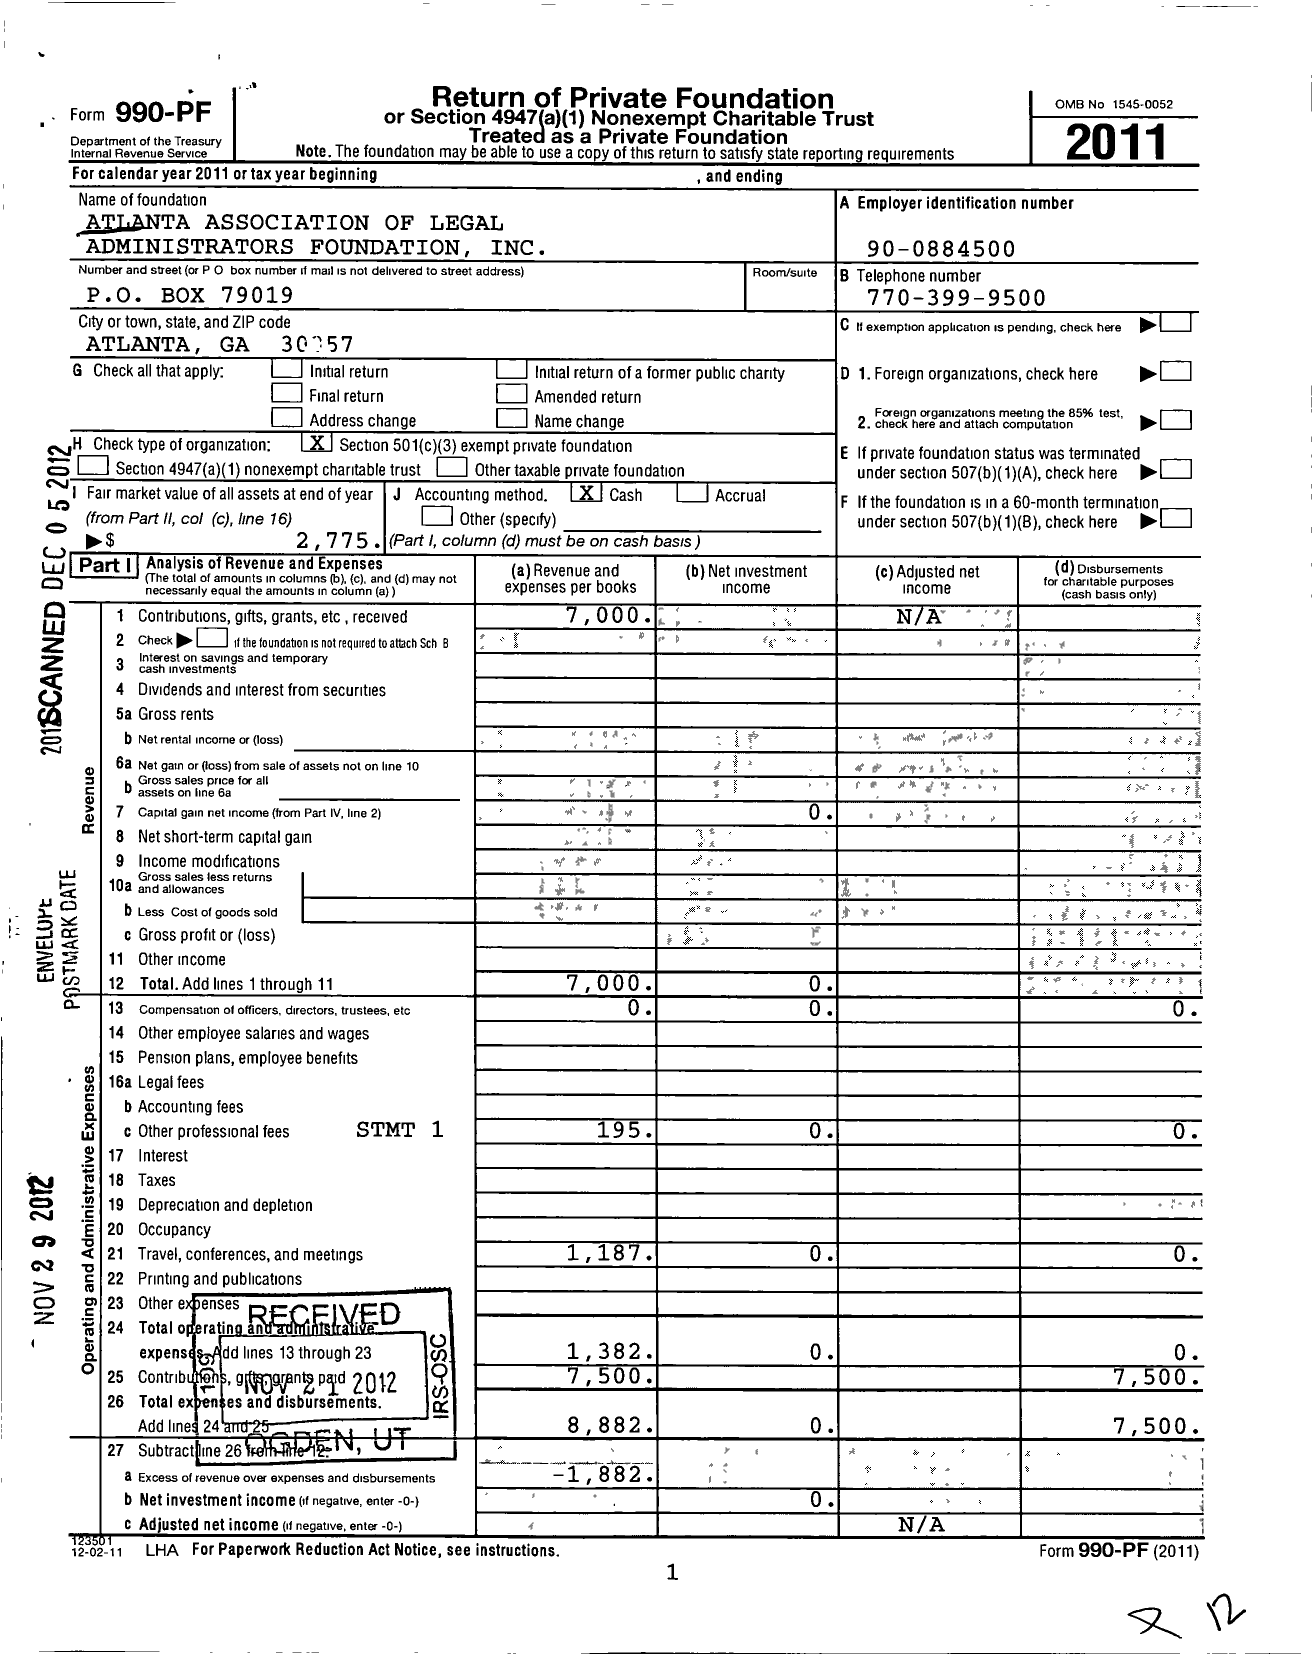 Image of first page of 2011 Form 990PF for Atlanta Association of Legal Administrators Foundation